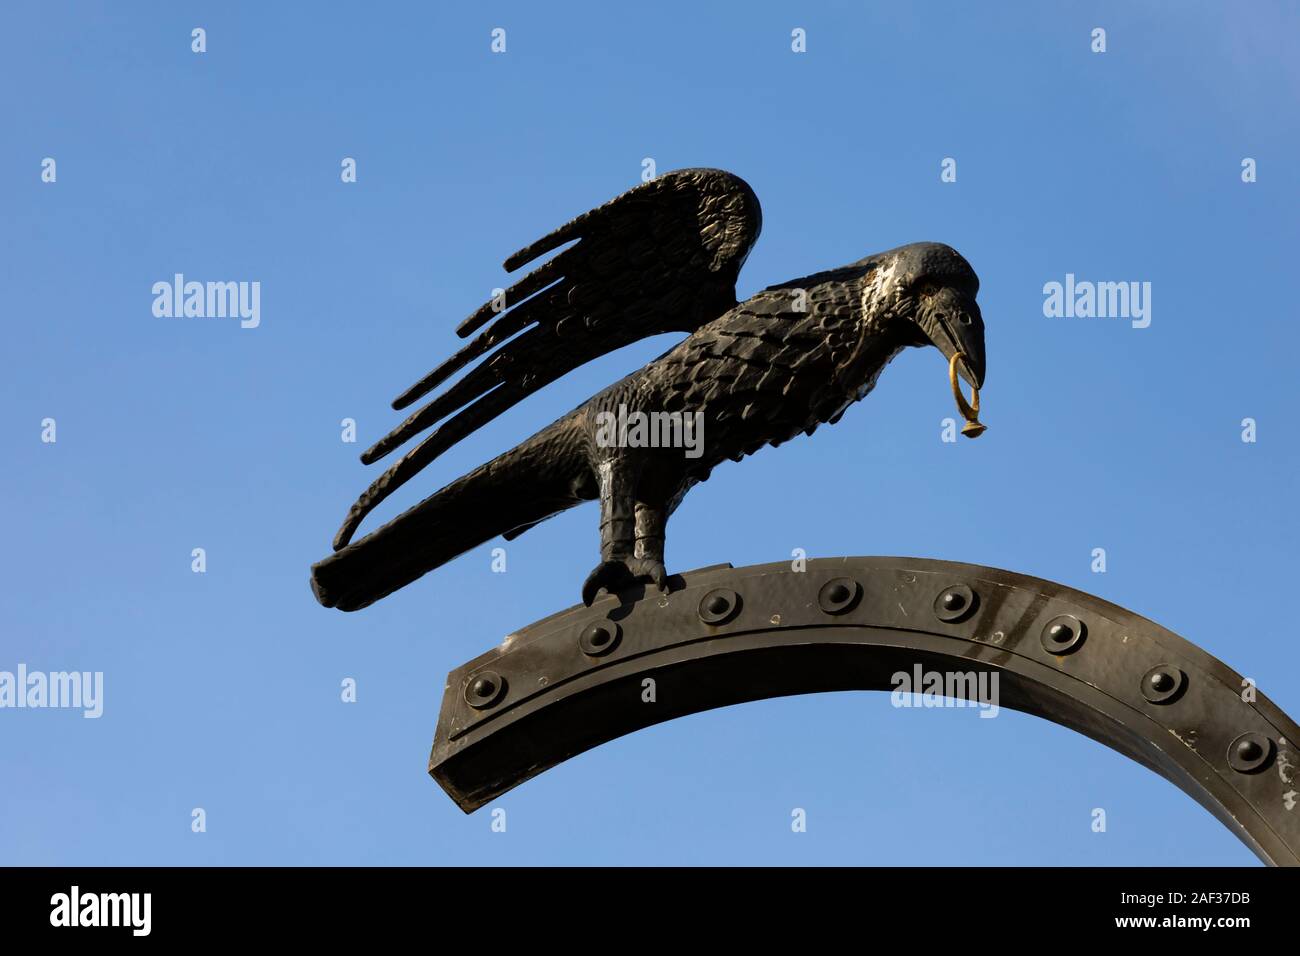 Heraldic symbol of a raven with a signet ring. of King Matthias on the Crow Gate at Buda Castle. Winter in Budapest, Hungary. December 2019 Stock Photo